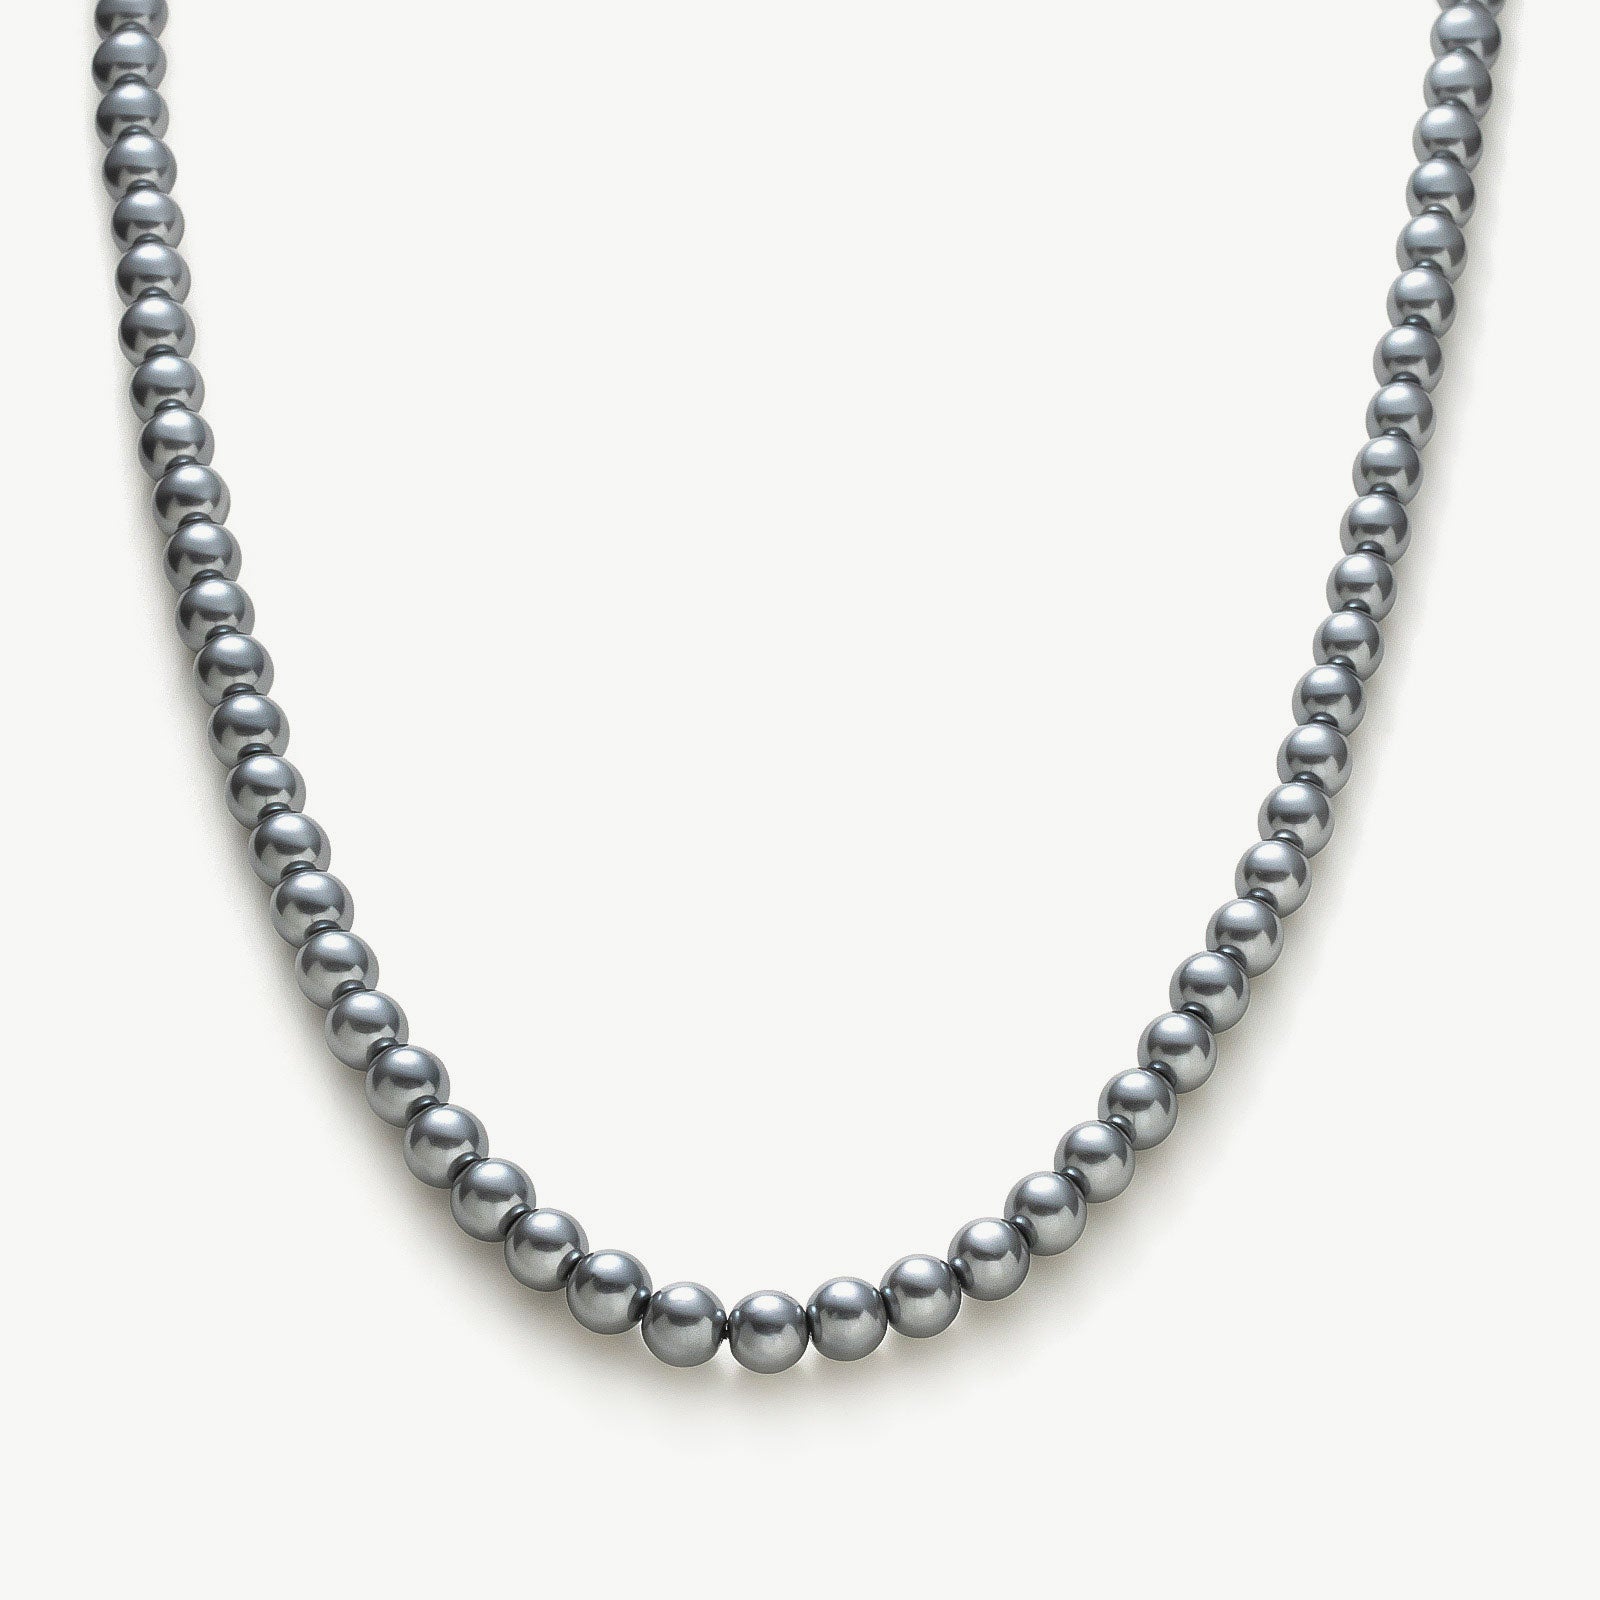 Dove Grey Water Pearl Necklace, a sophisticated and elegant piece featuring lustrous water pearls in a soothing dove grey hue, creating a timeless and graceful accessory.